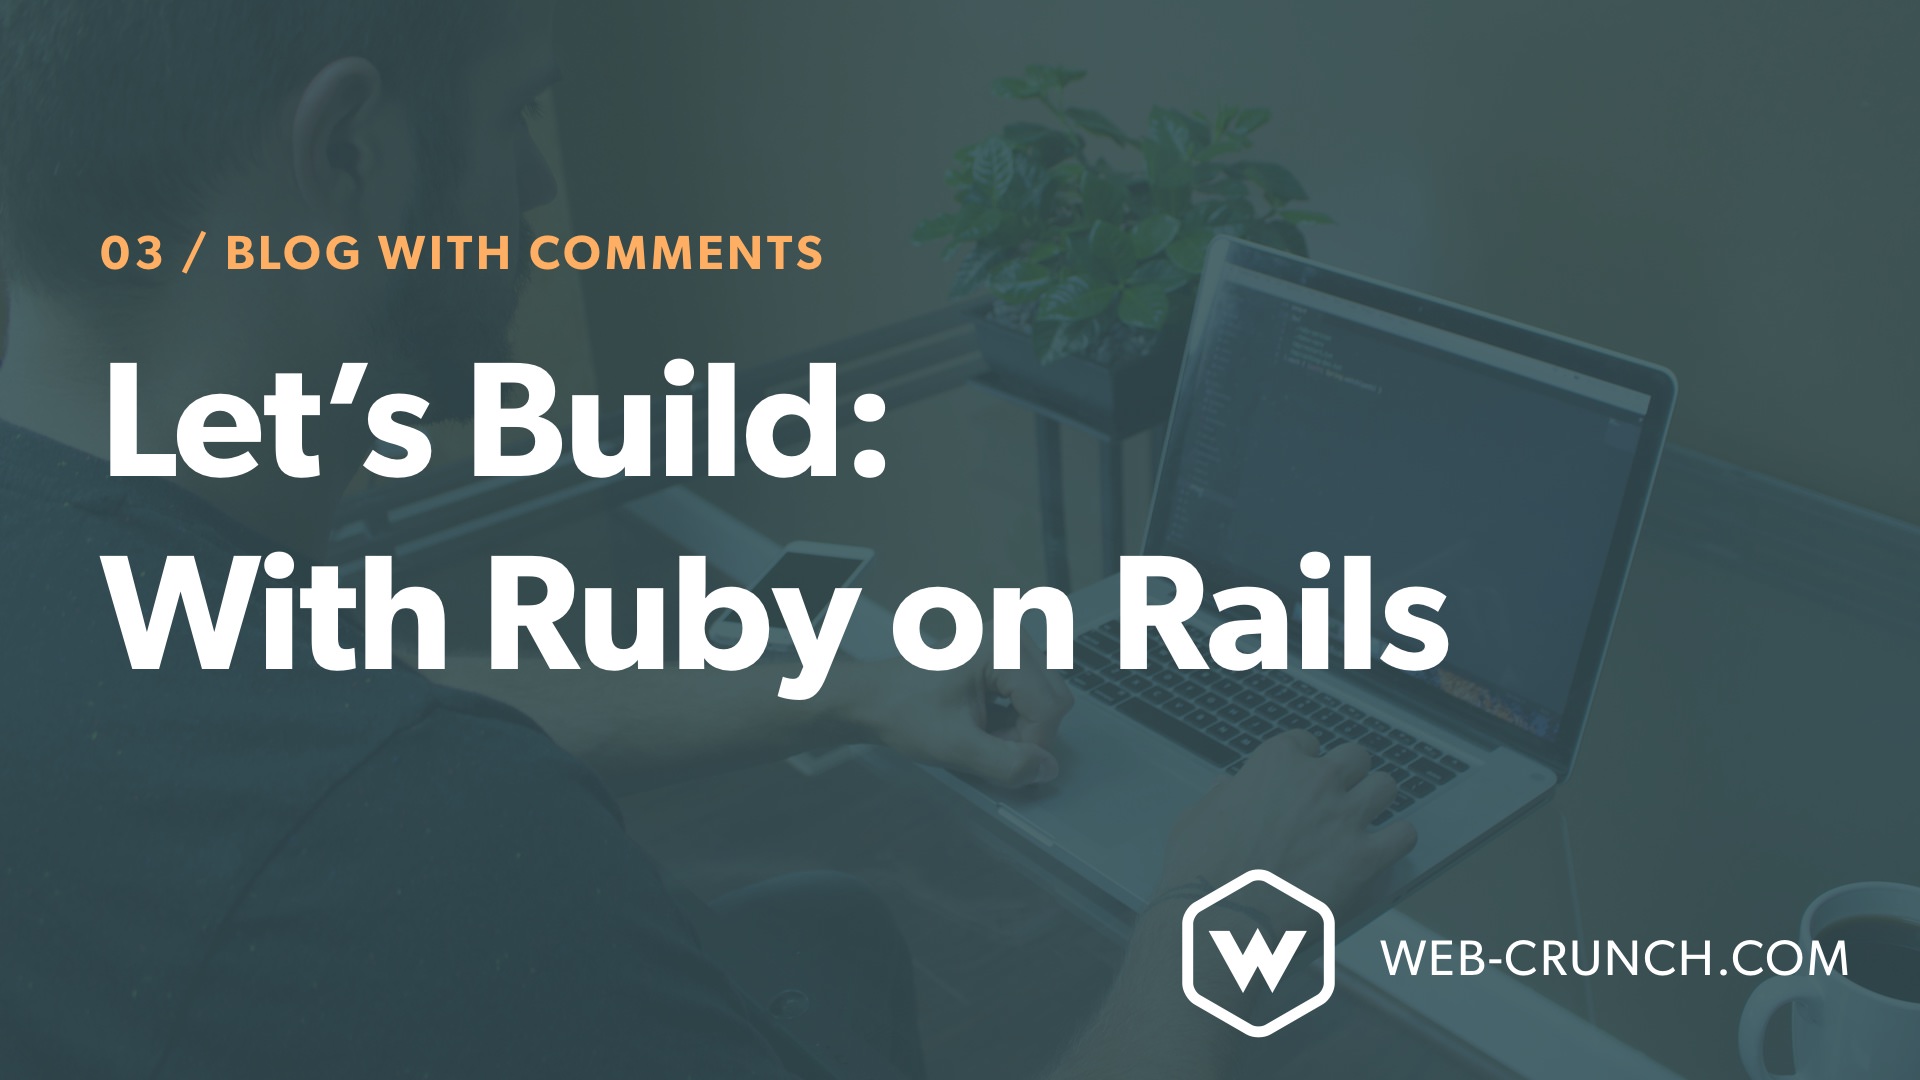 Let's Build: With Ruby on Rails - Blog with Comments